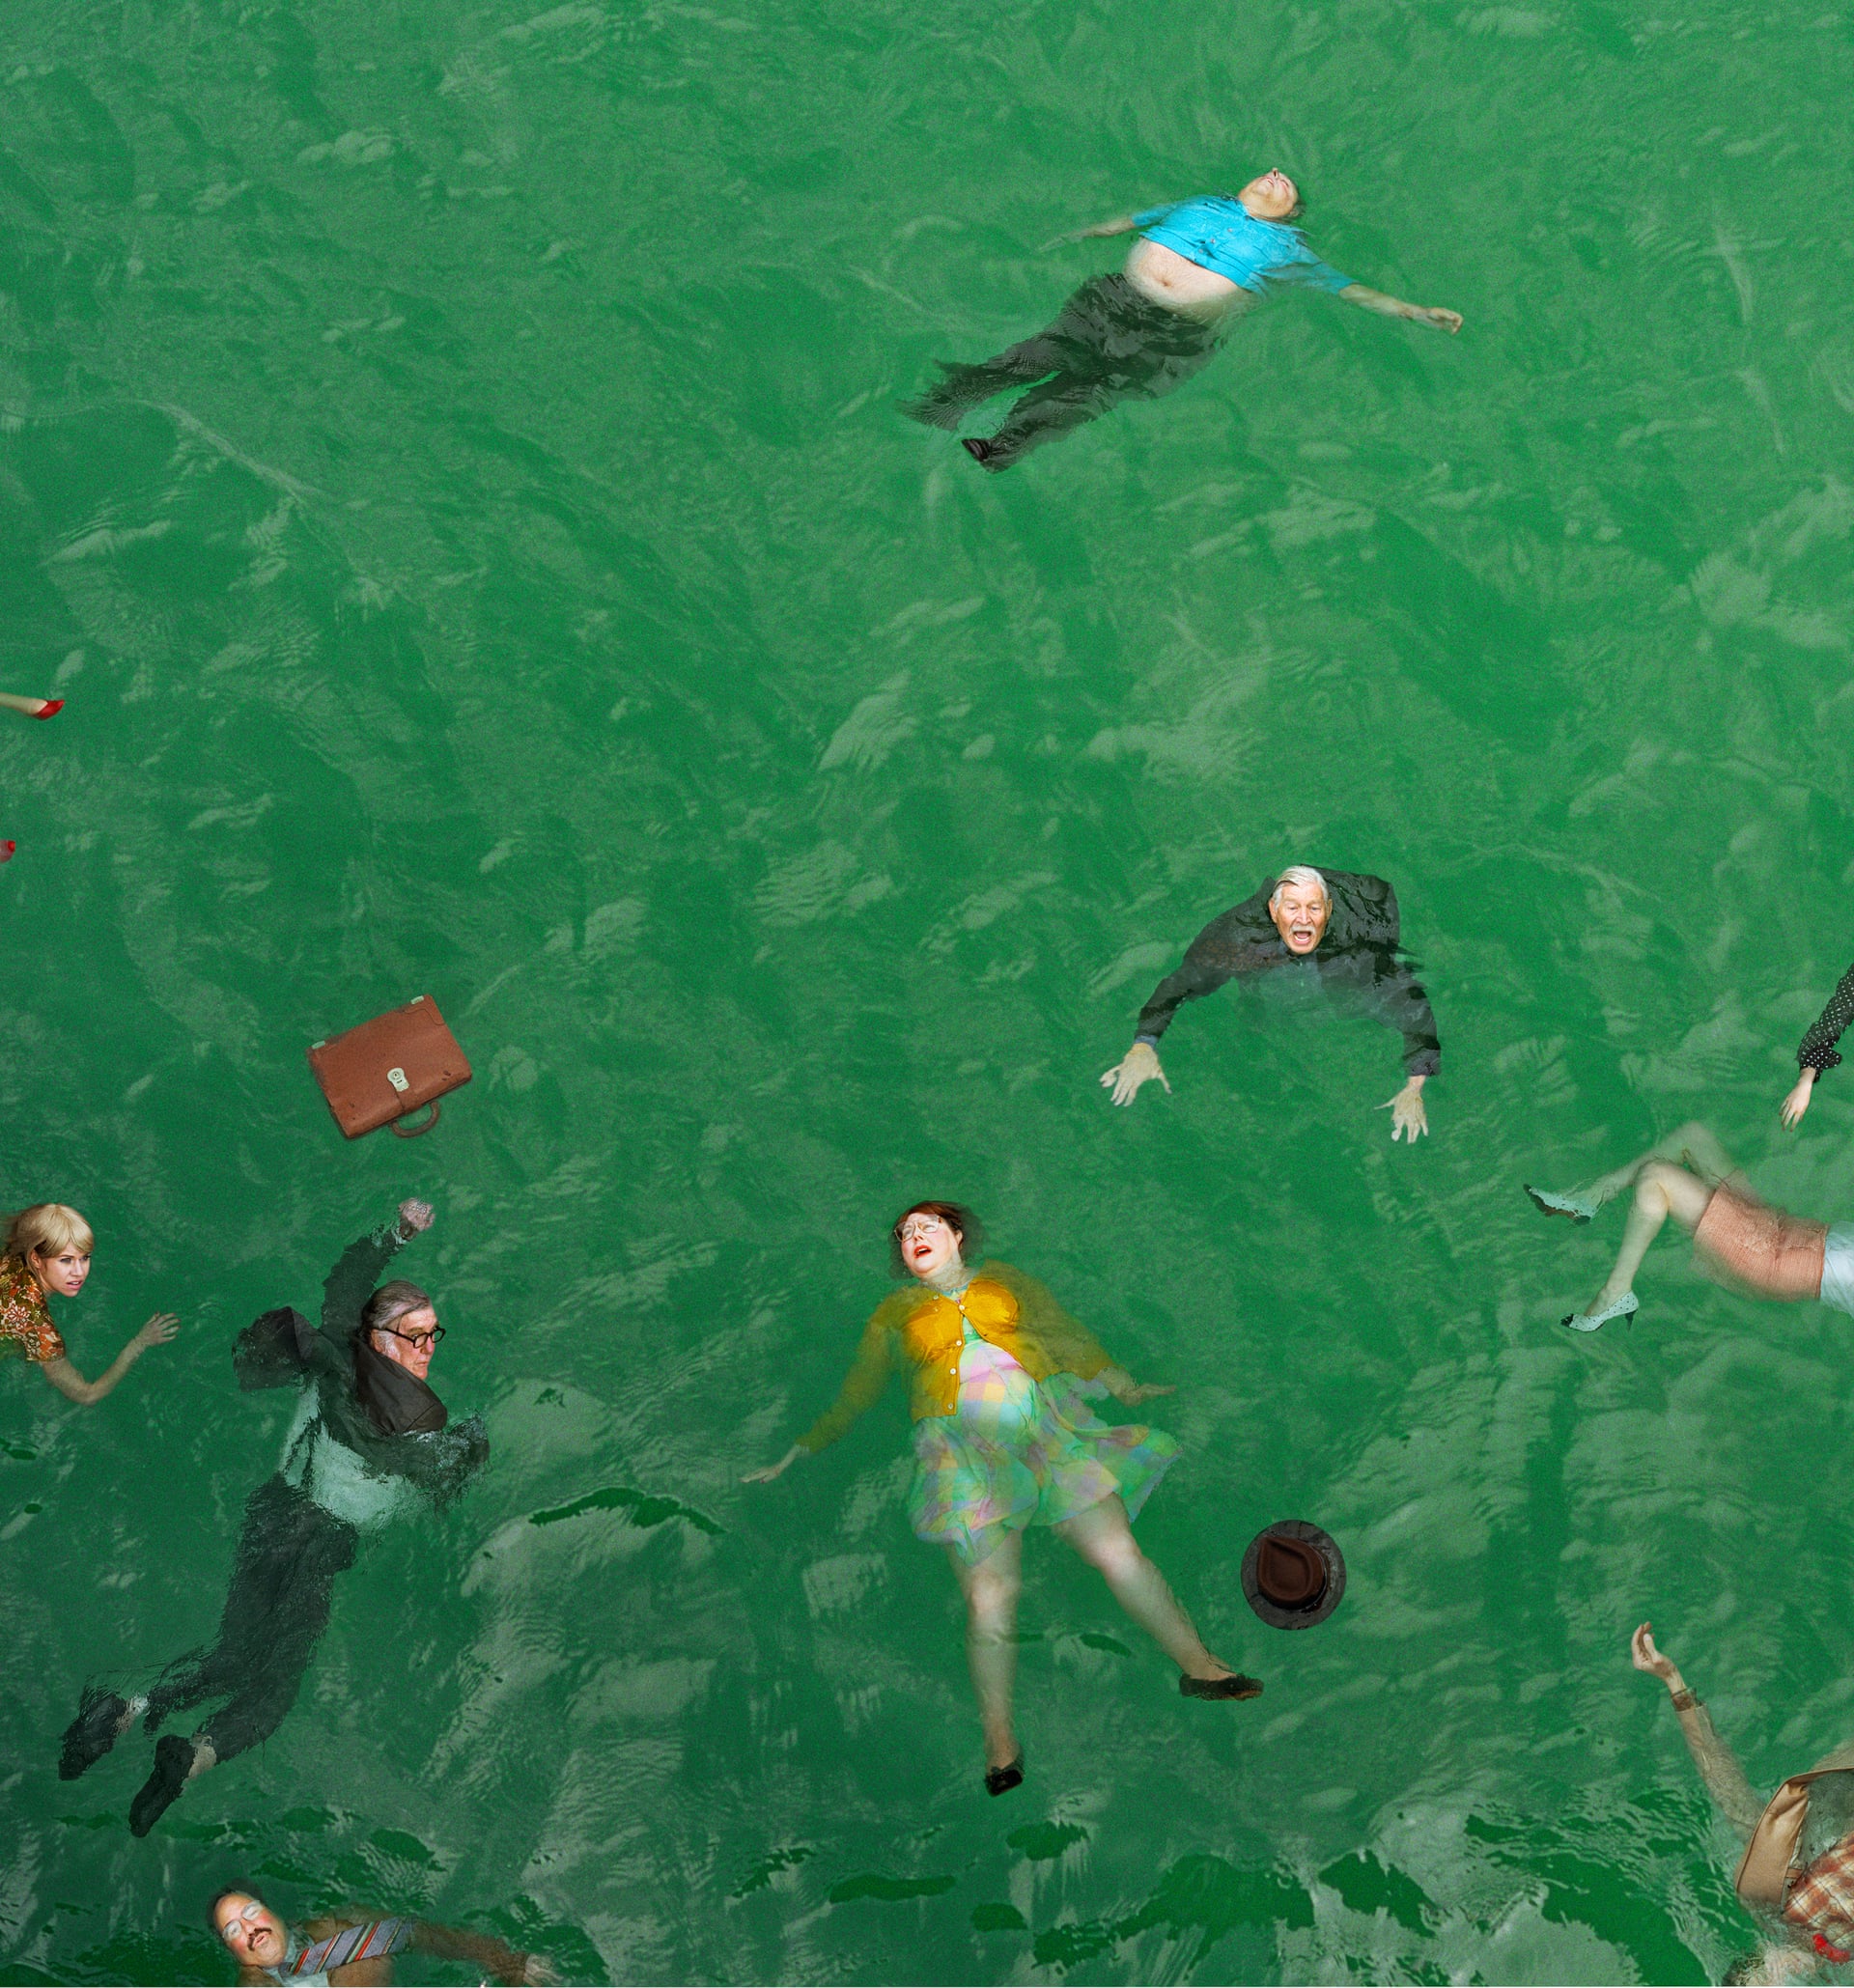 High angle shot of a group of fully dressed people floating in green water like they might have been in a plane crash